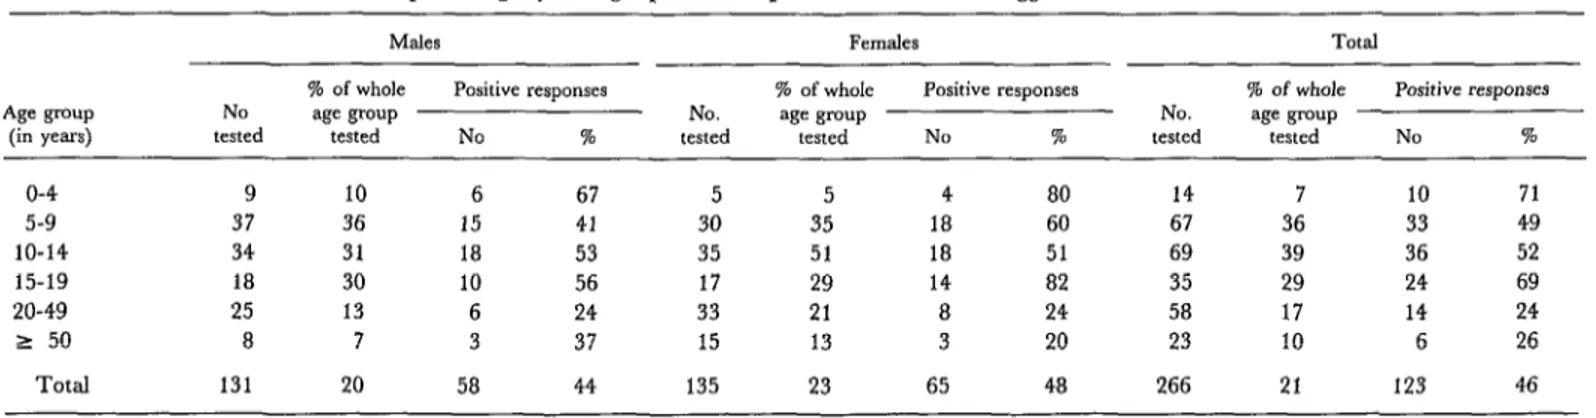 Table  2.  ApipC  Grande  serologic  results,  showing  the  distribution  by  age  and  sex  of  the  268  people  tested  for  antibodies  to  T